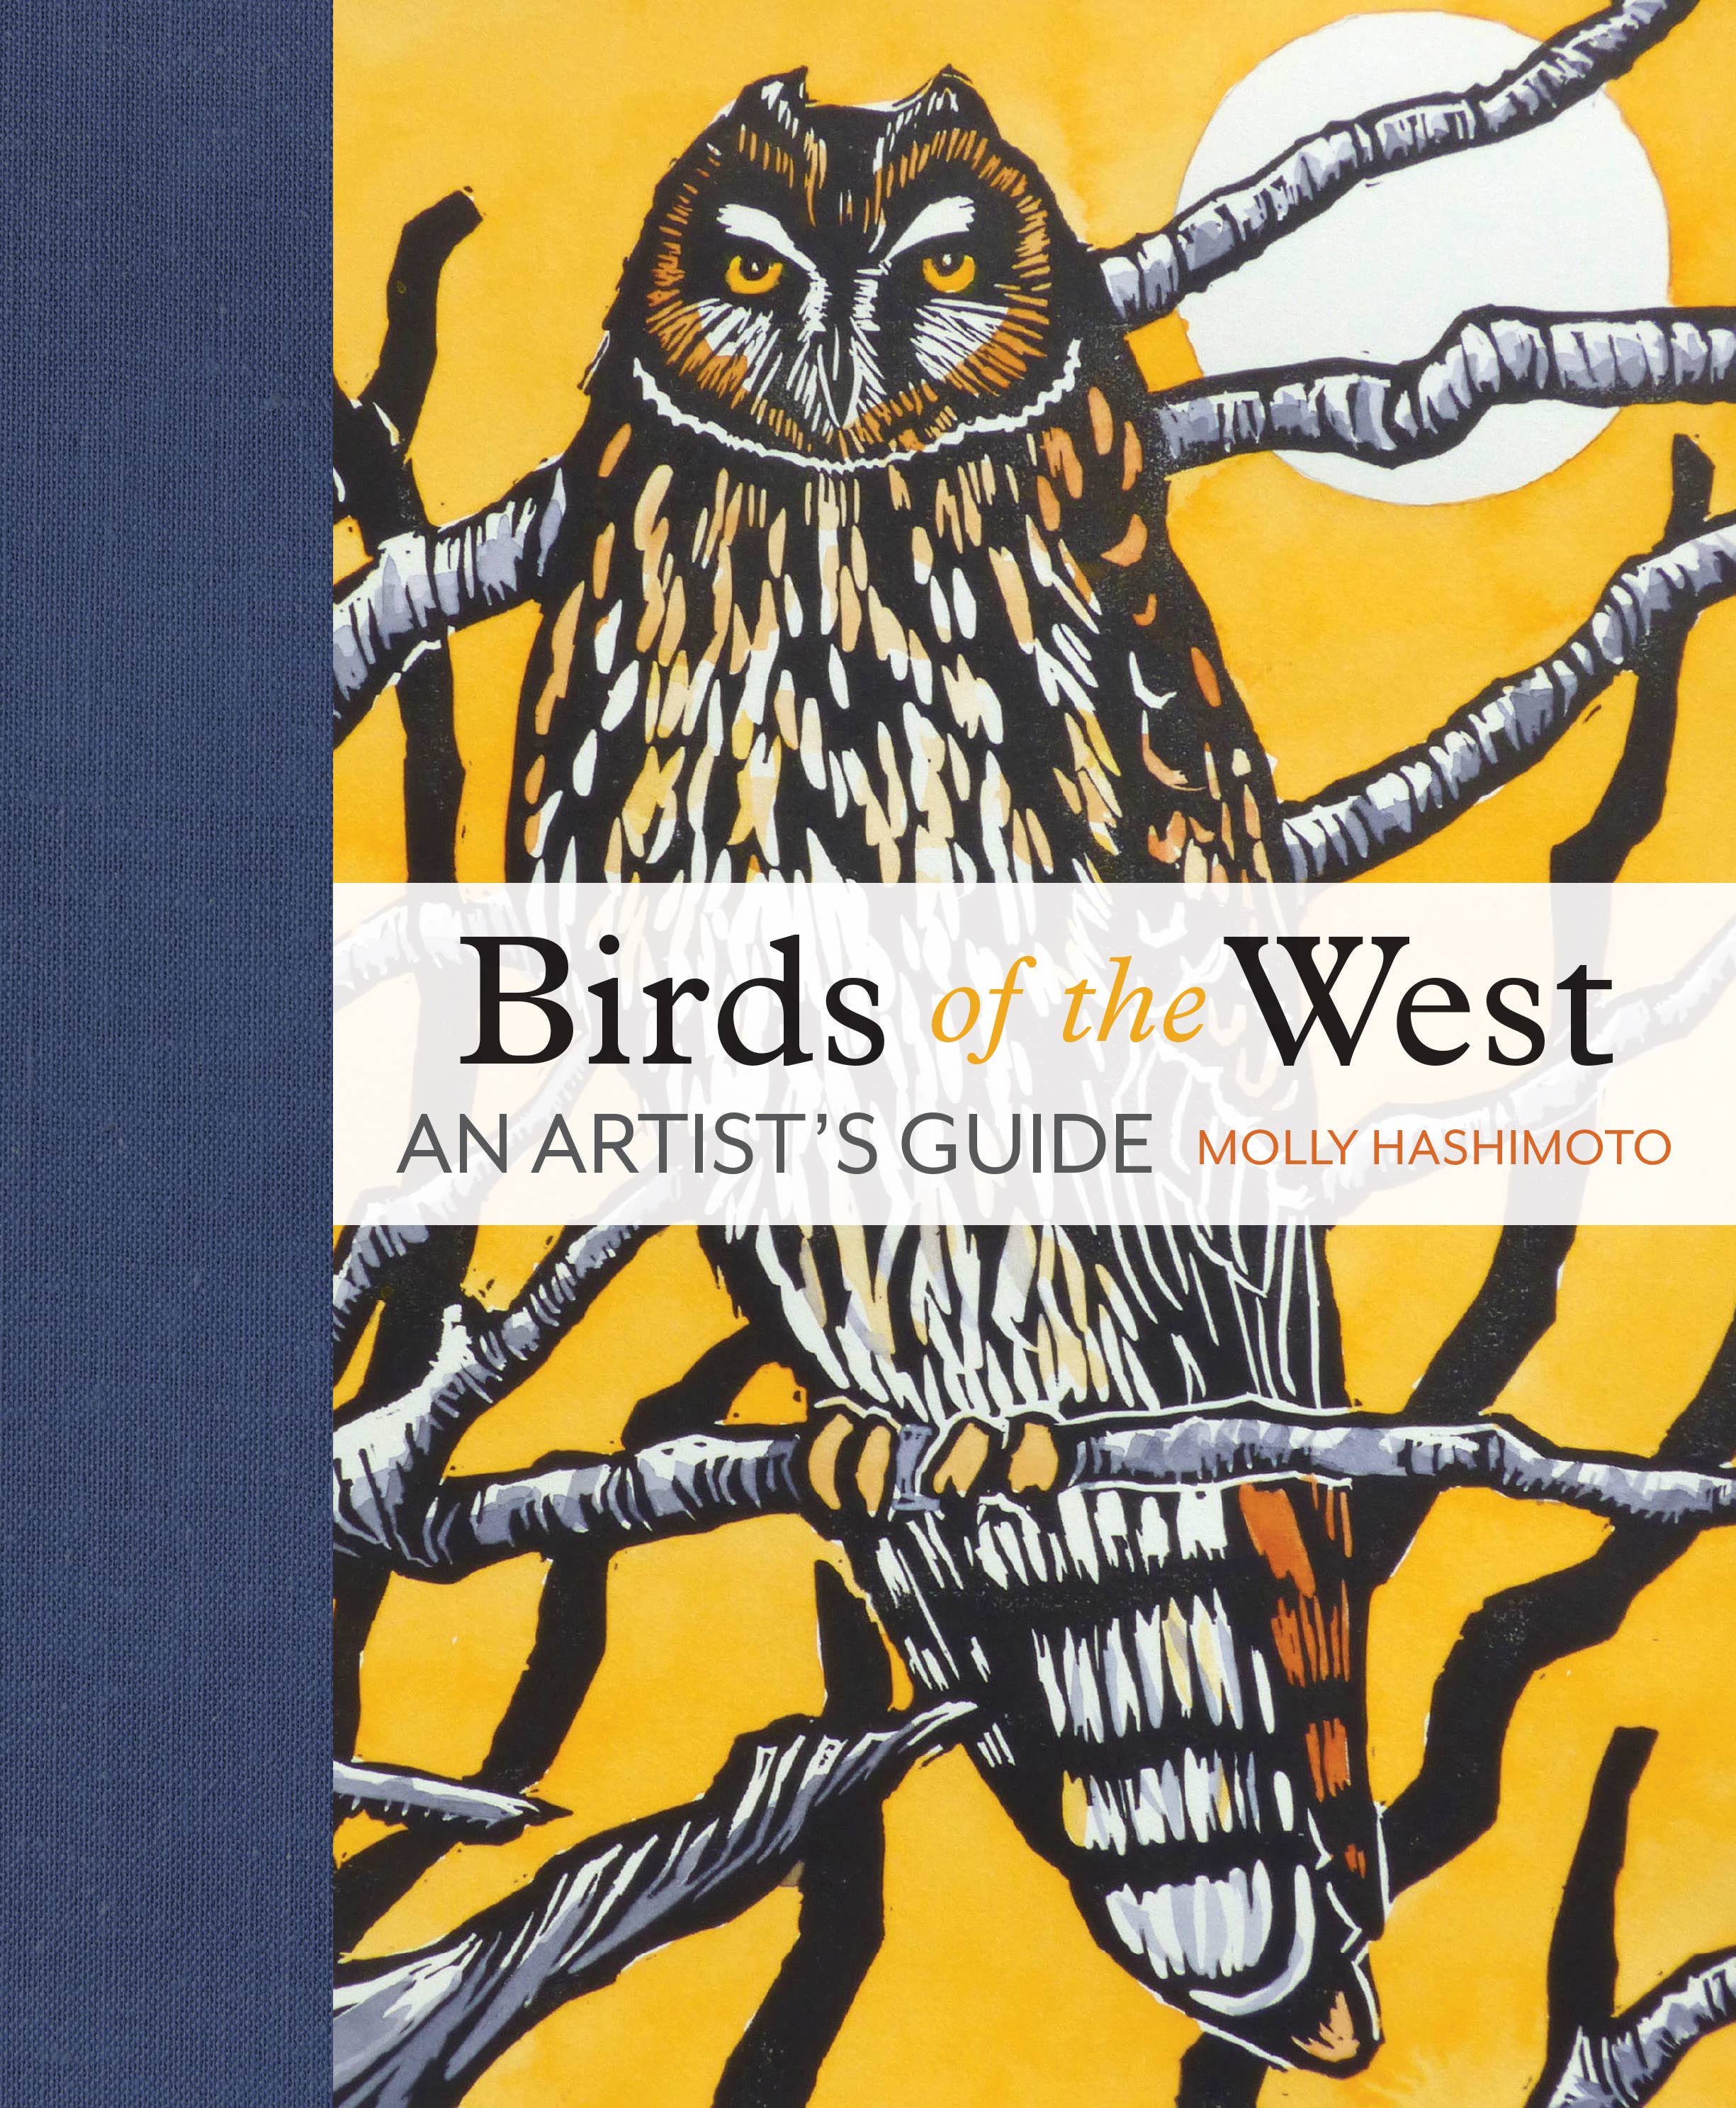 Mountaineers Books - Birds of the West An Artist's Guide